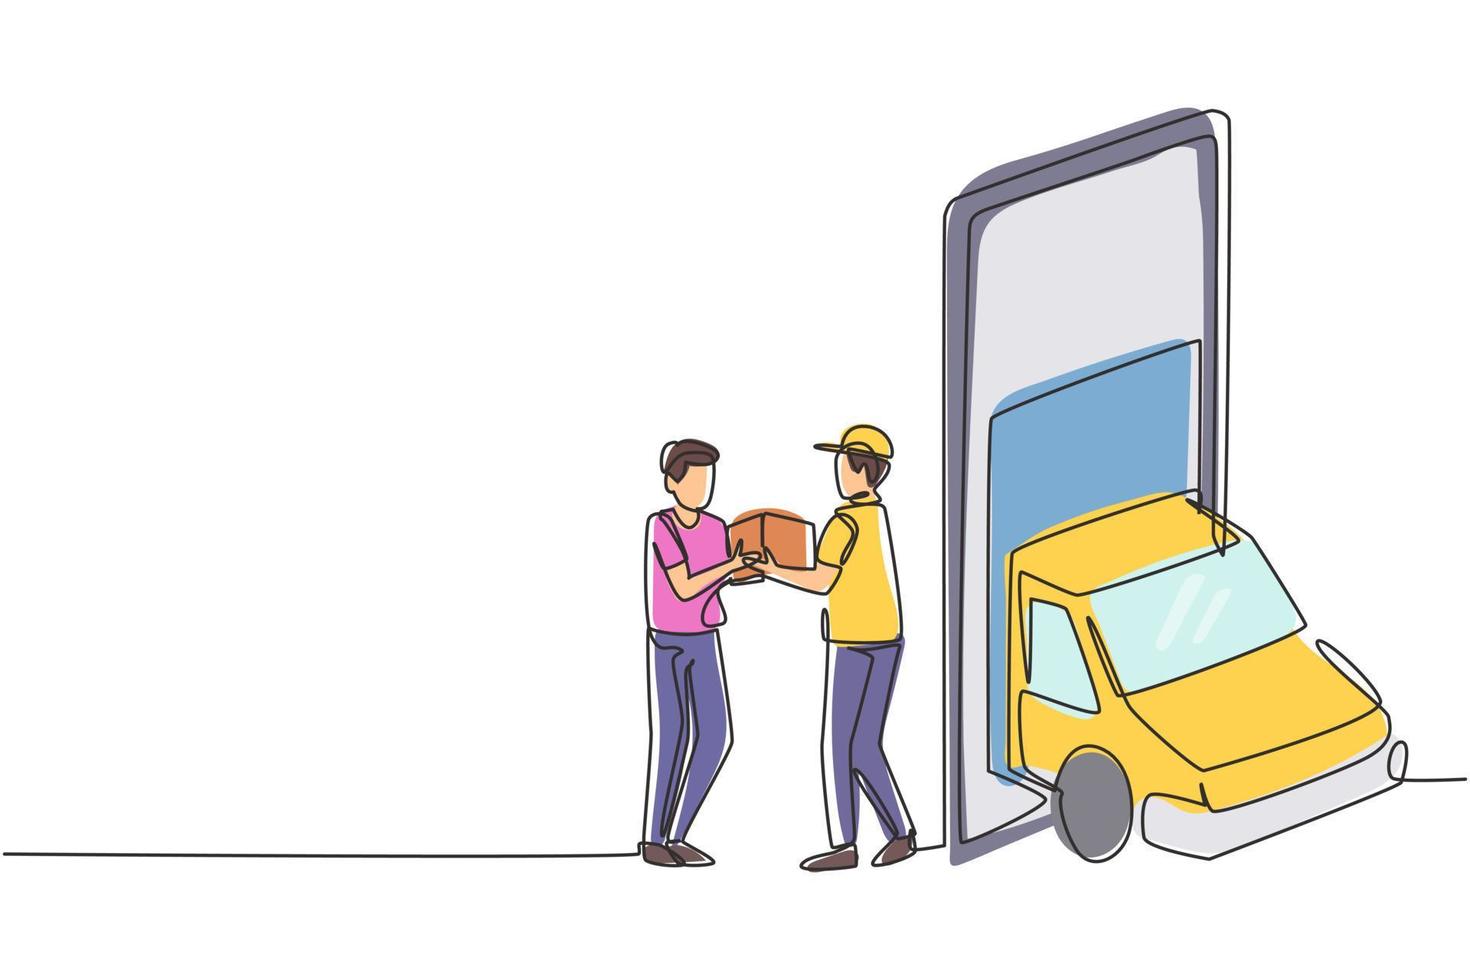 Single one line drawing delivery box car comes out partly from giant smartphone screen. Male courier gives package box to male customer. Modern continuous line draw design graphic vector illustration